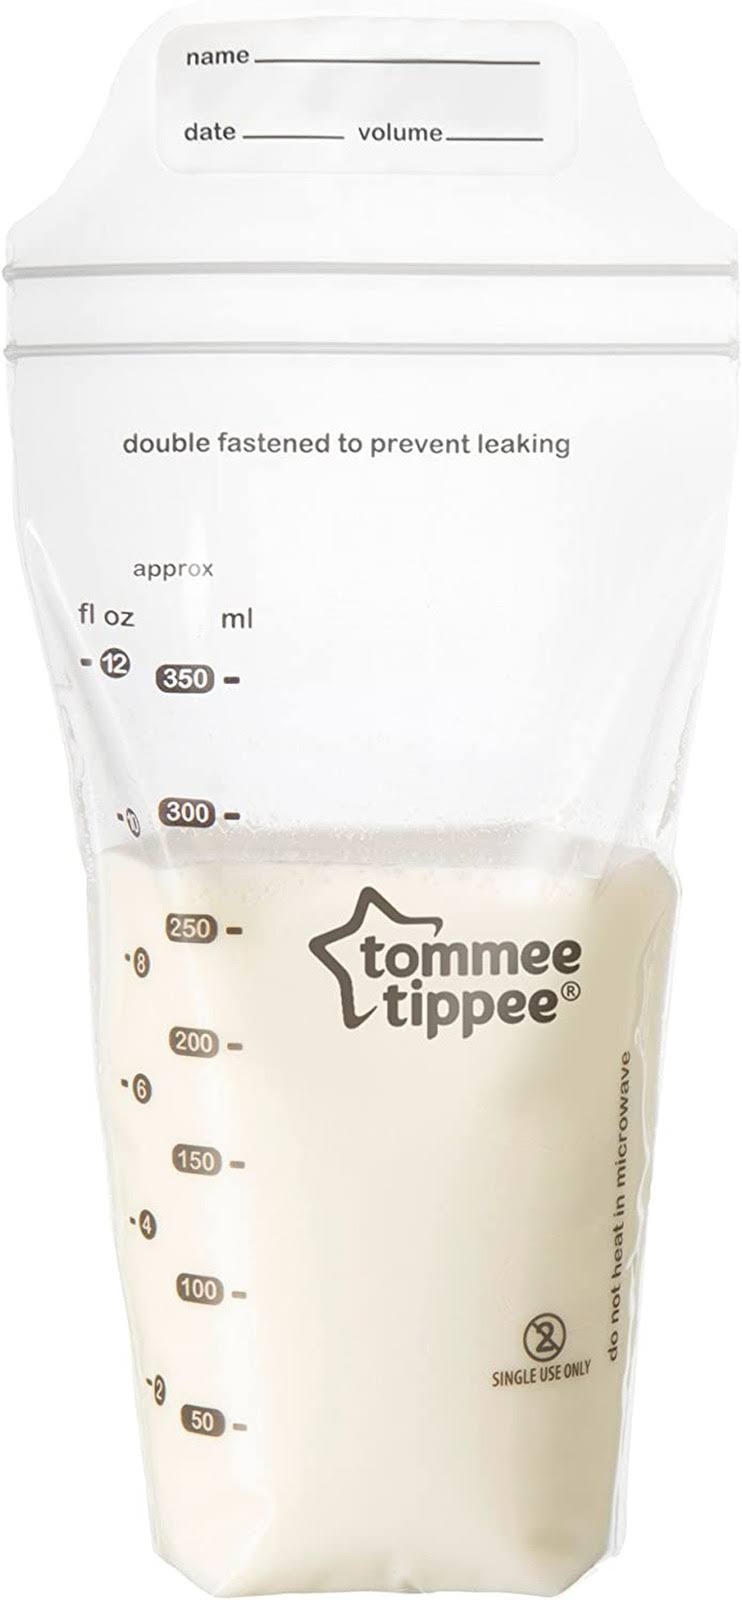 Tommee Tippee Closer To Nature Milk Storage Bags - 36pk